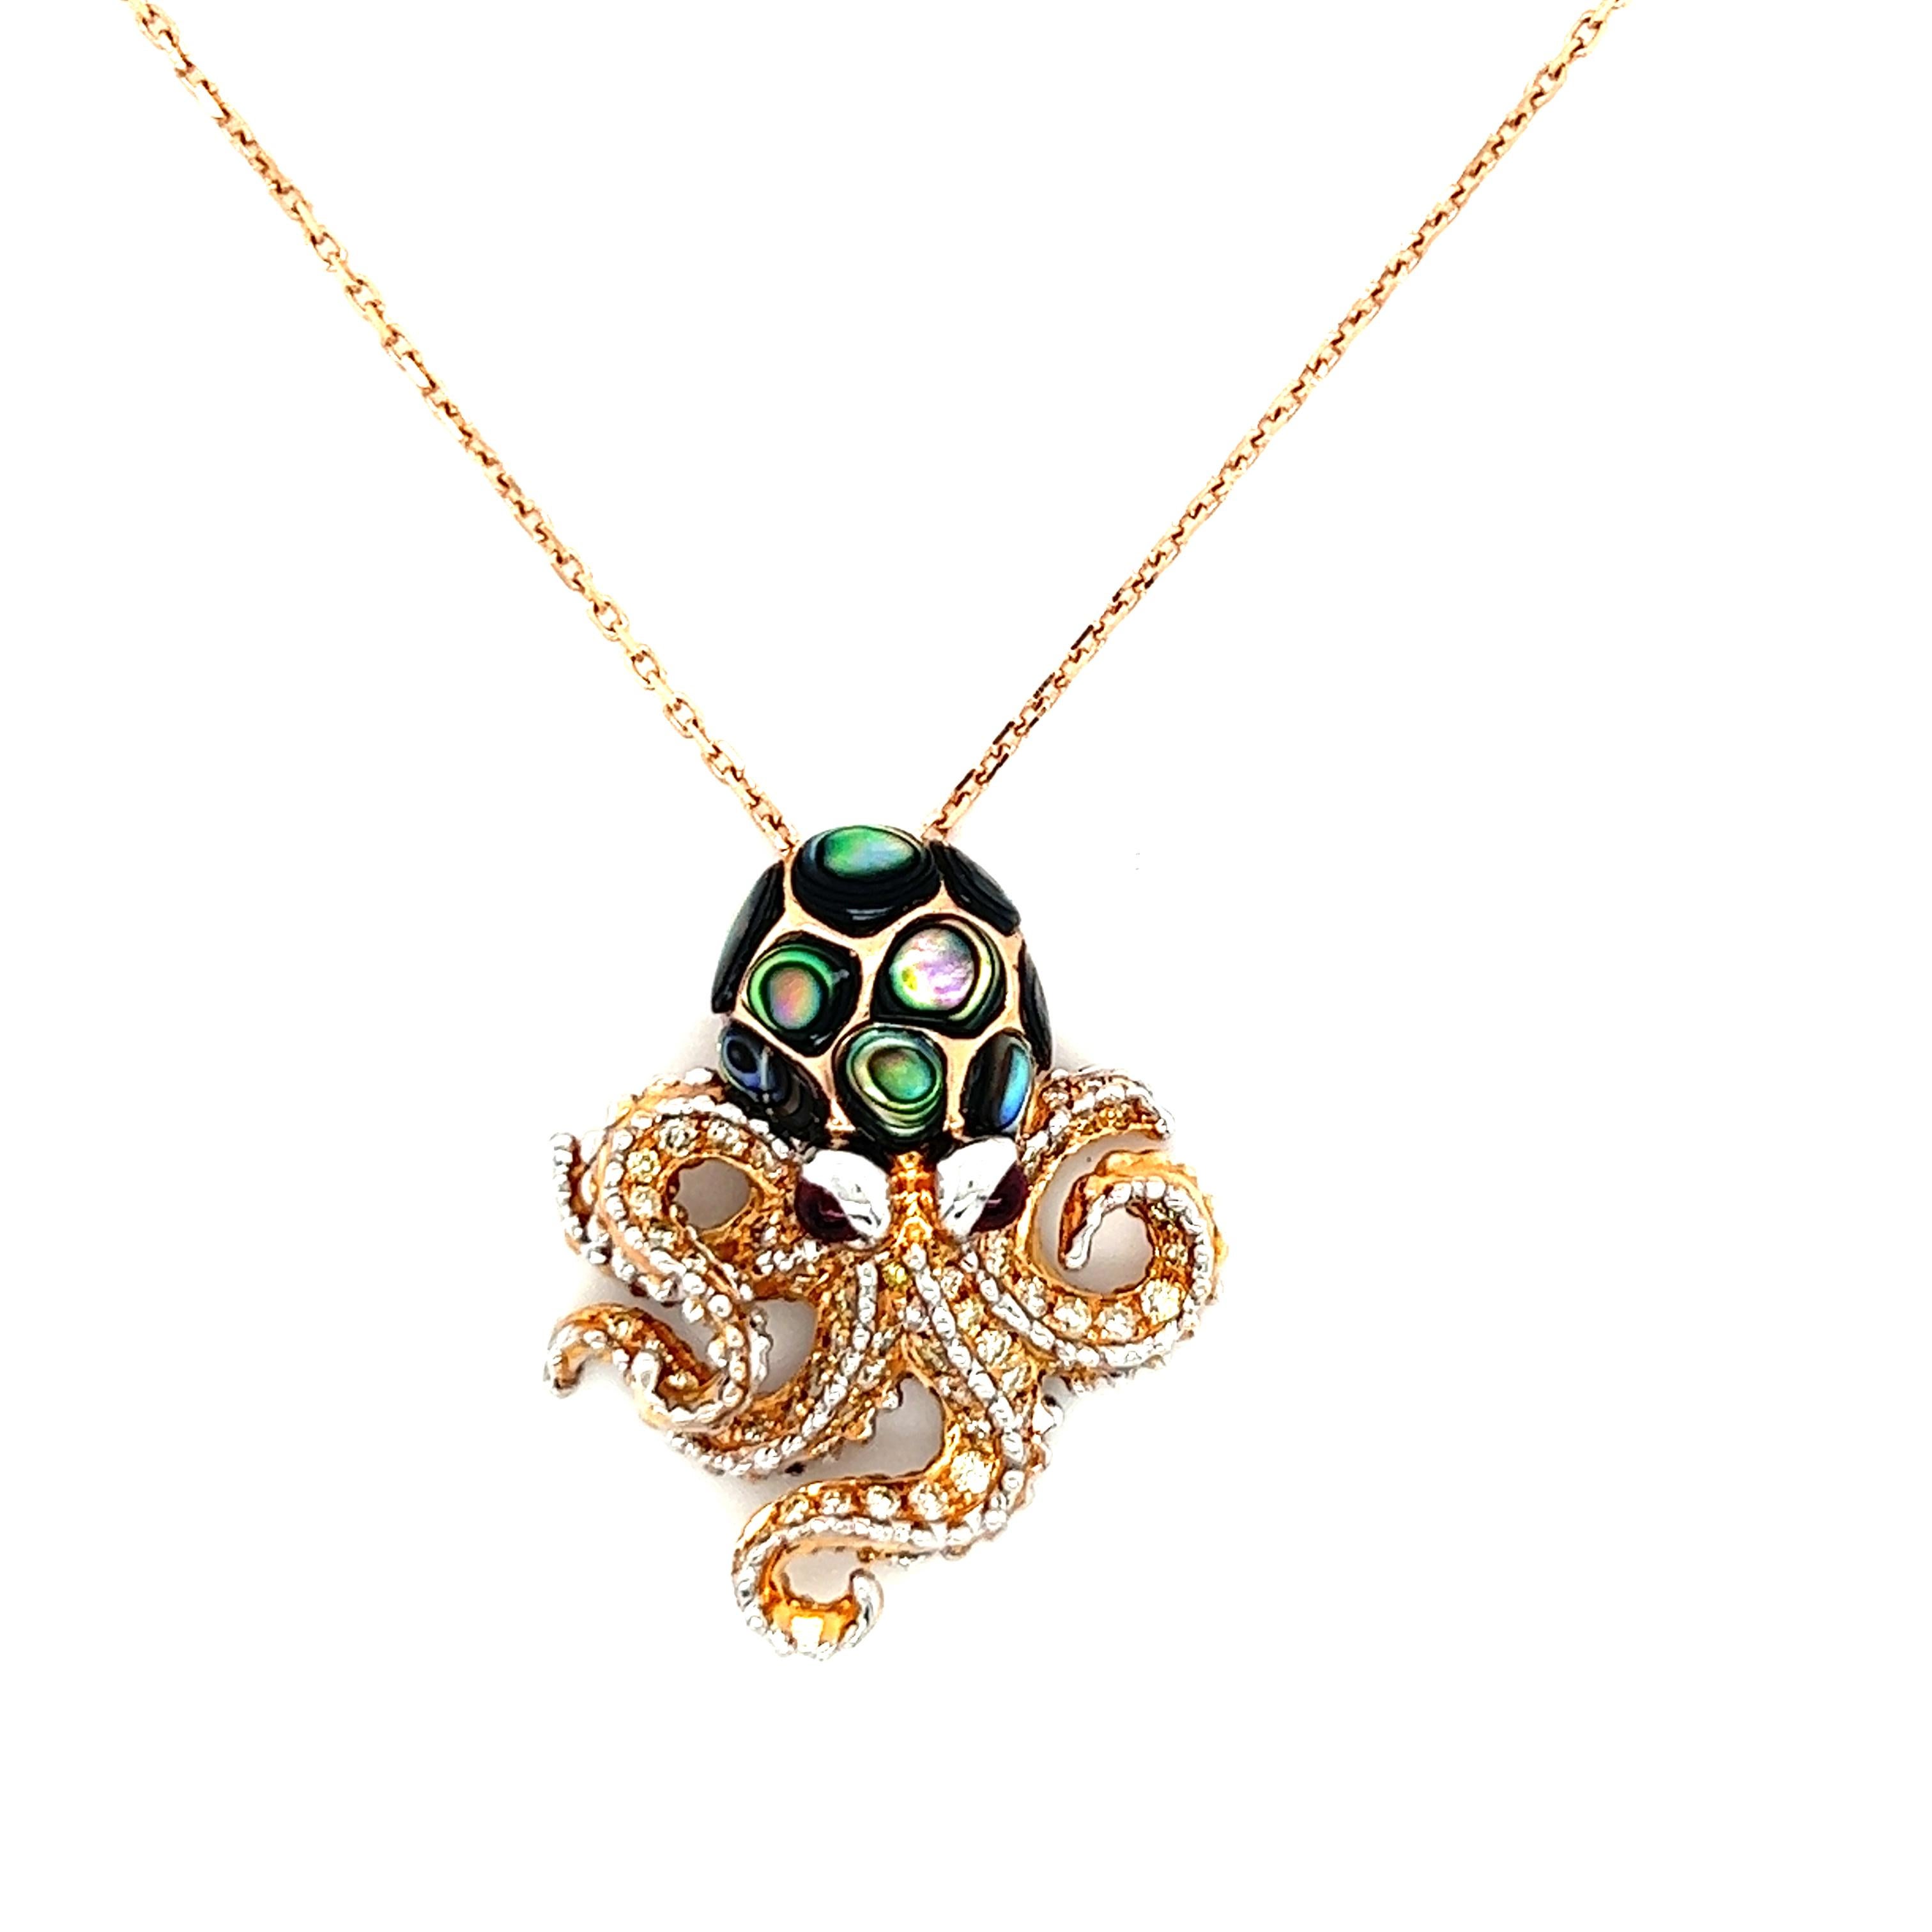 18 K Rose Gold Abalone Shell Diamonds Octopus Pendant Necklace

9 Abalone Shells 1.29 CT
60 Fancy Diamonds 0.45 CT
2 Rubies 0.25 CT
18 K Rose Gold 7.28 GM

The Abalone Shell Represents The Oceans Healing Energy. Using Abalone Generates A Feeling Of